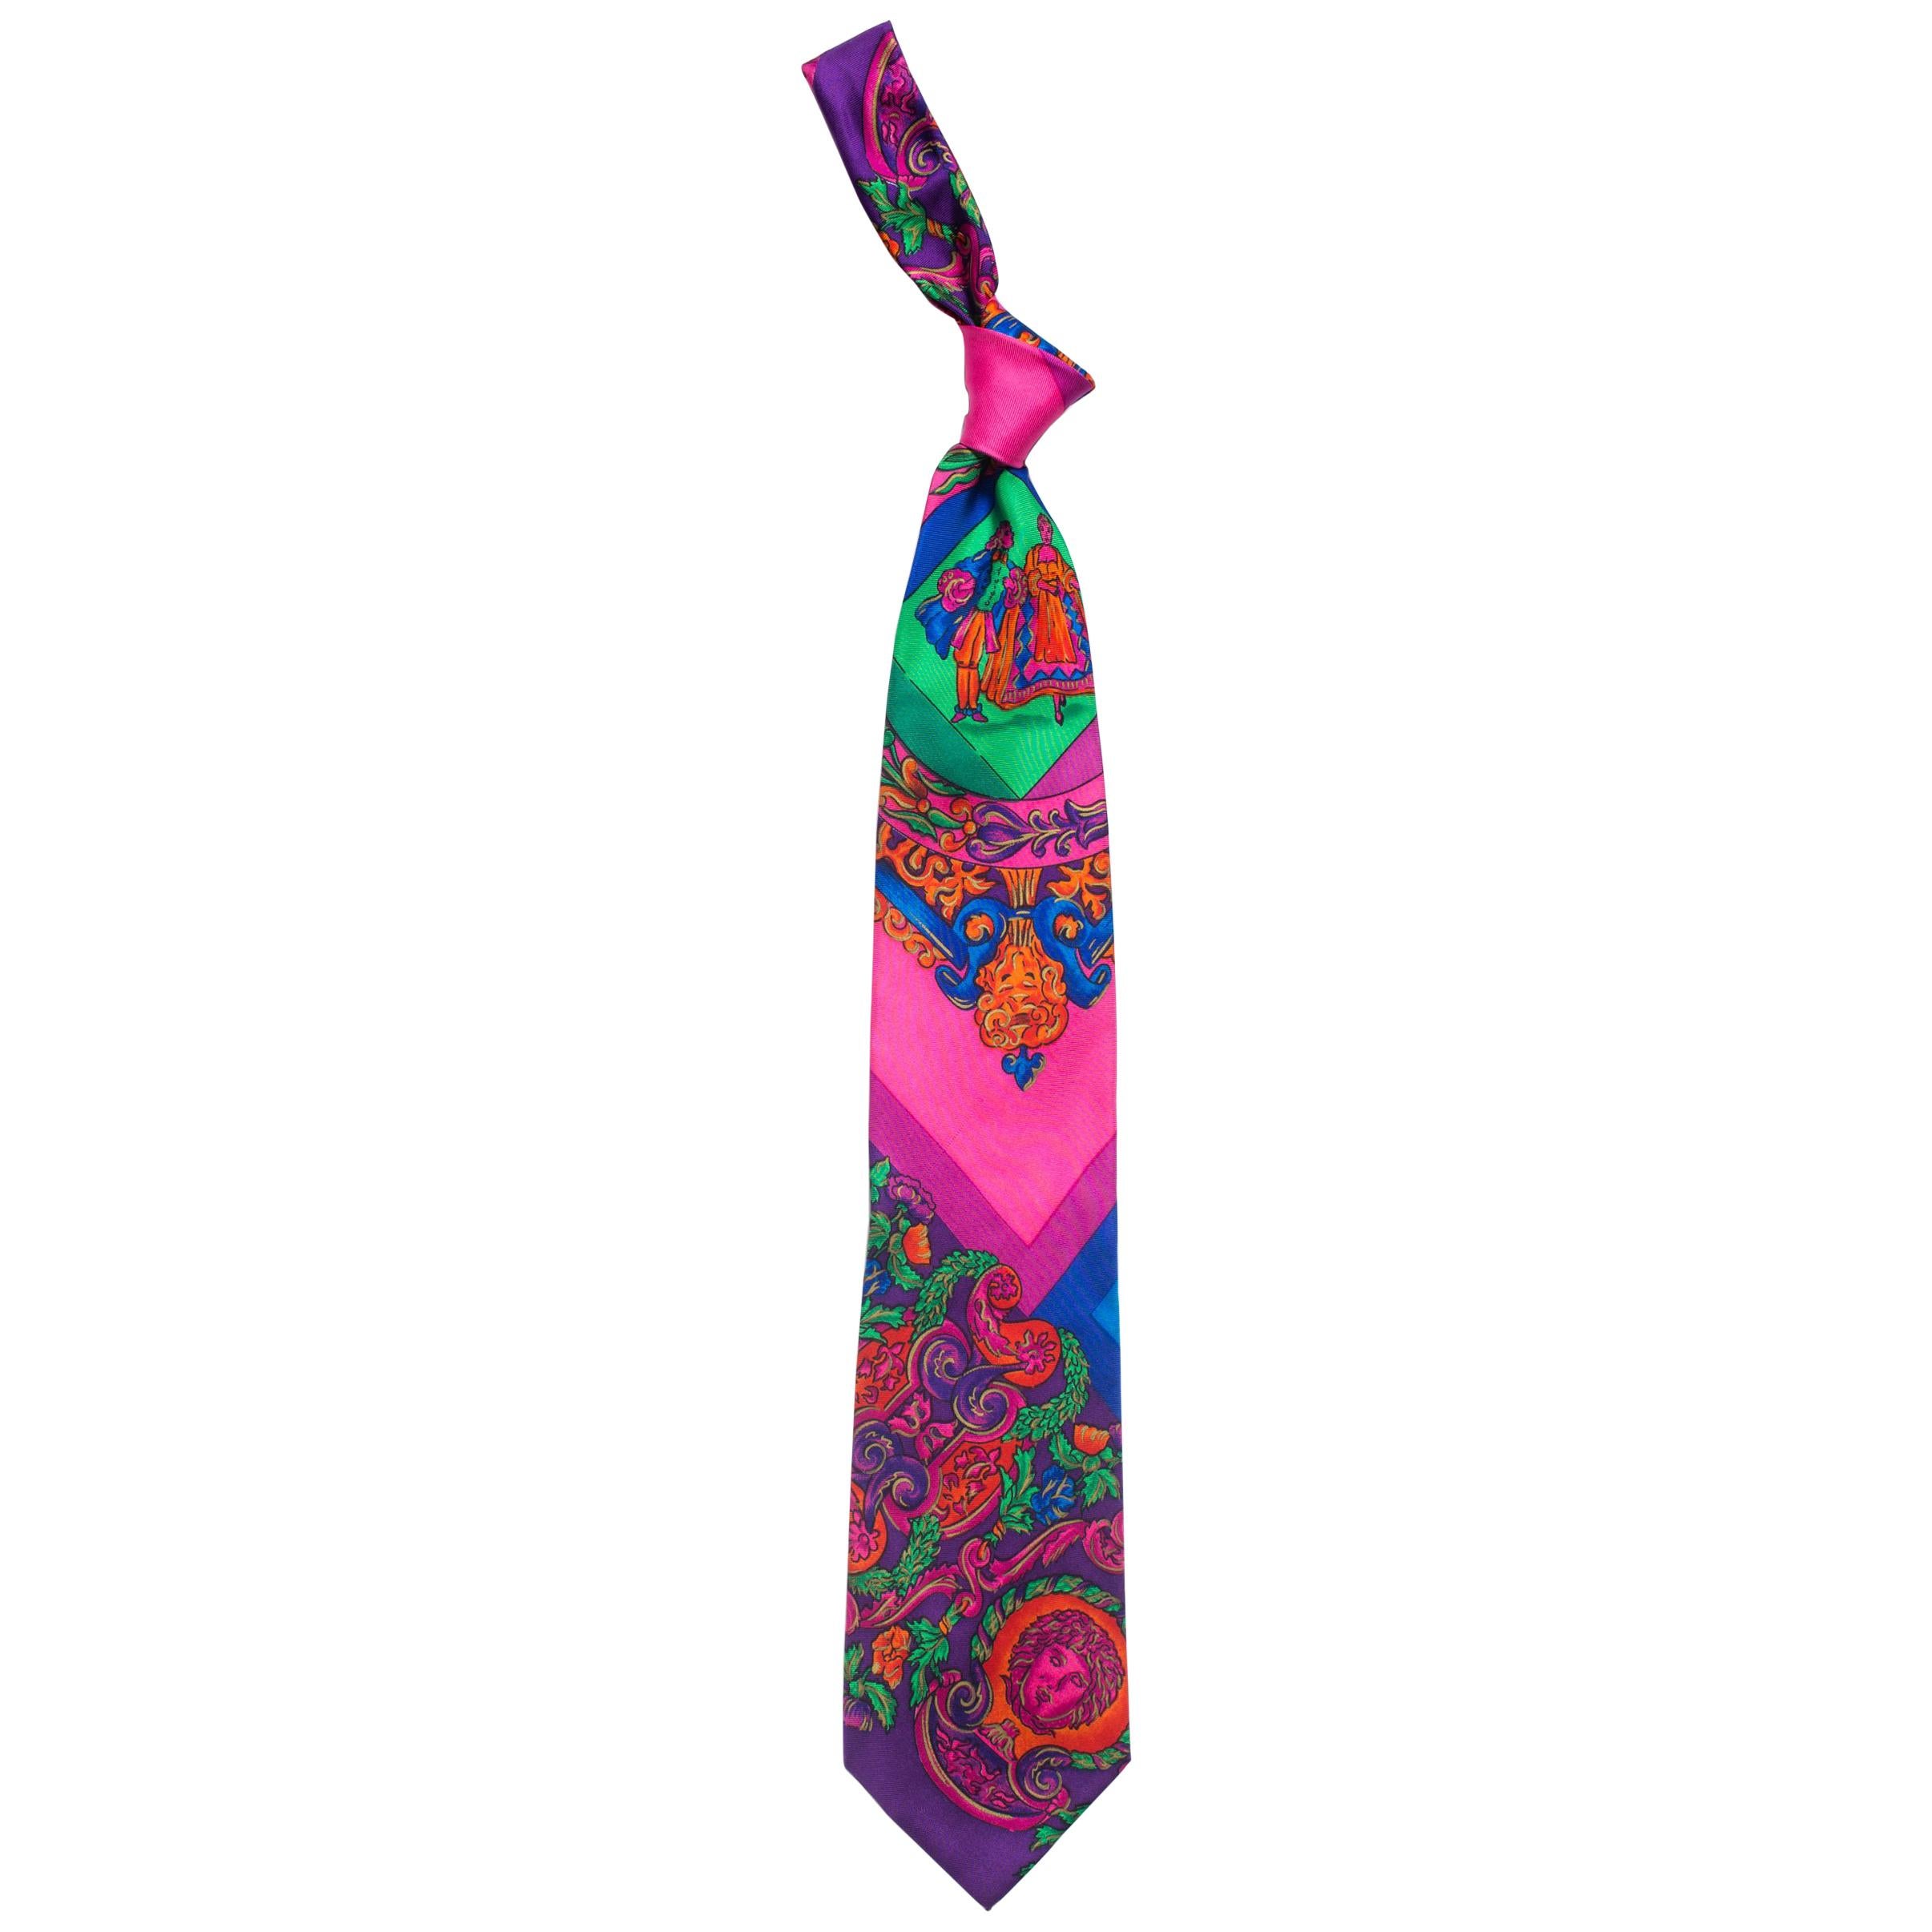 1990s Gianni Versace Hot Pink Medusa Silk Tie with Gold Metallic Accents